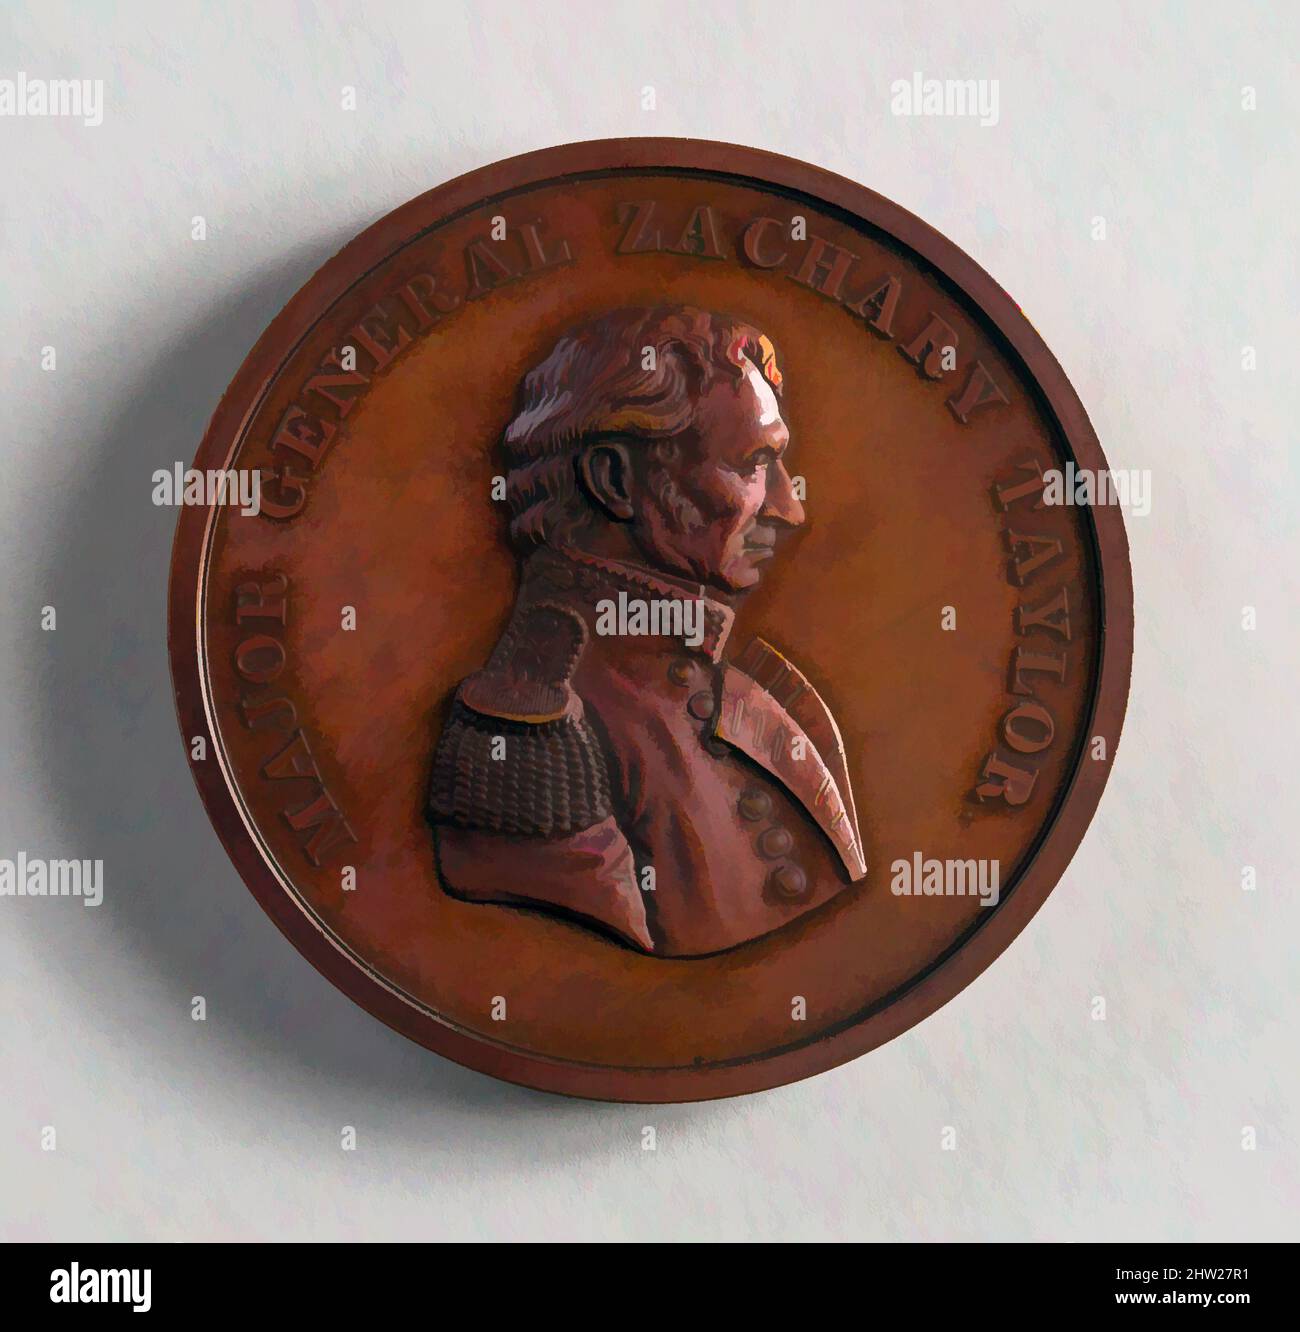 Art inspired by Medal of Major General Z. Taylor, 1847, Bronze, Diam. 2 1/2 in. (6.4 cm), Metal, Classic works modernized by Artotop with a splash of modernity. Shapes, color and value, eye-catching visual impact on art. Emotions through freedom of artworks in a contemporary way. A timeless message pursuing a wildly creative new direction. Artists turning to the digital medium and creating the Artotop NFT Stock Photo